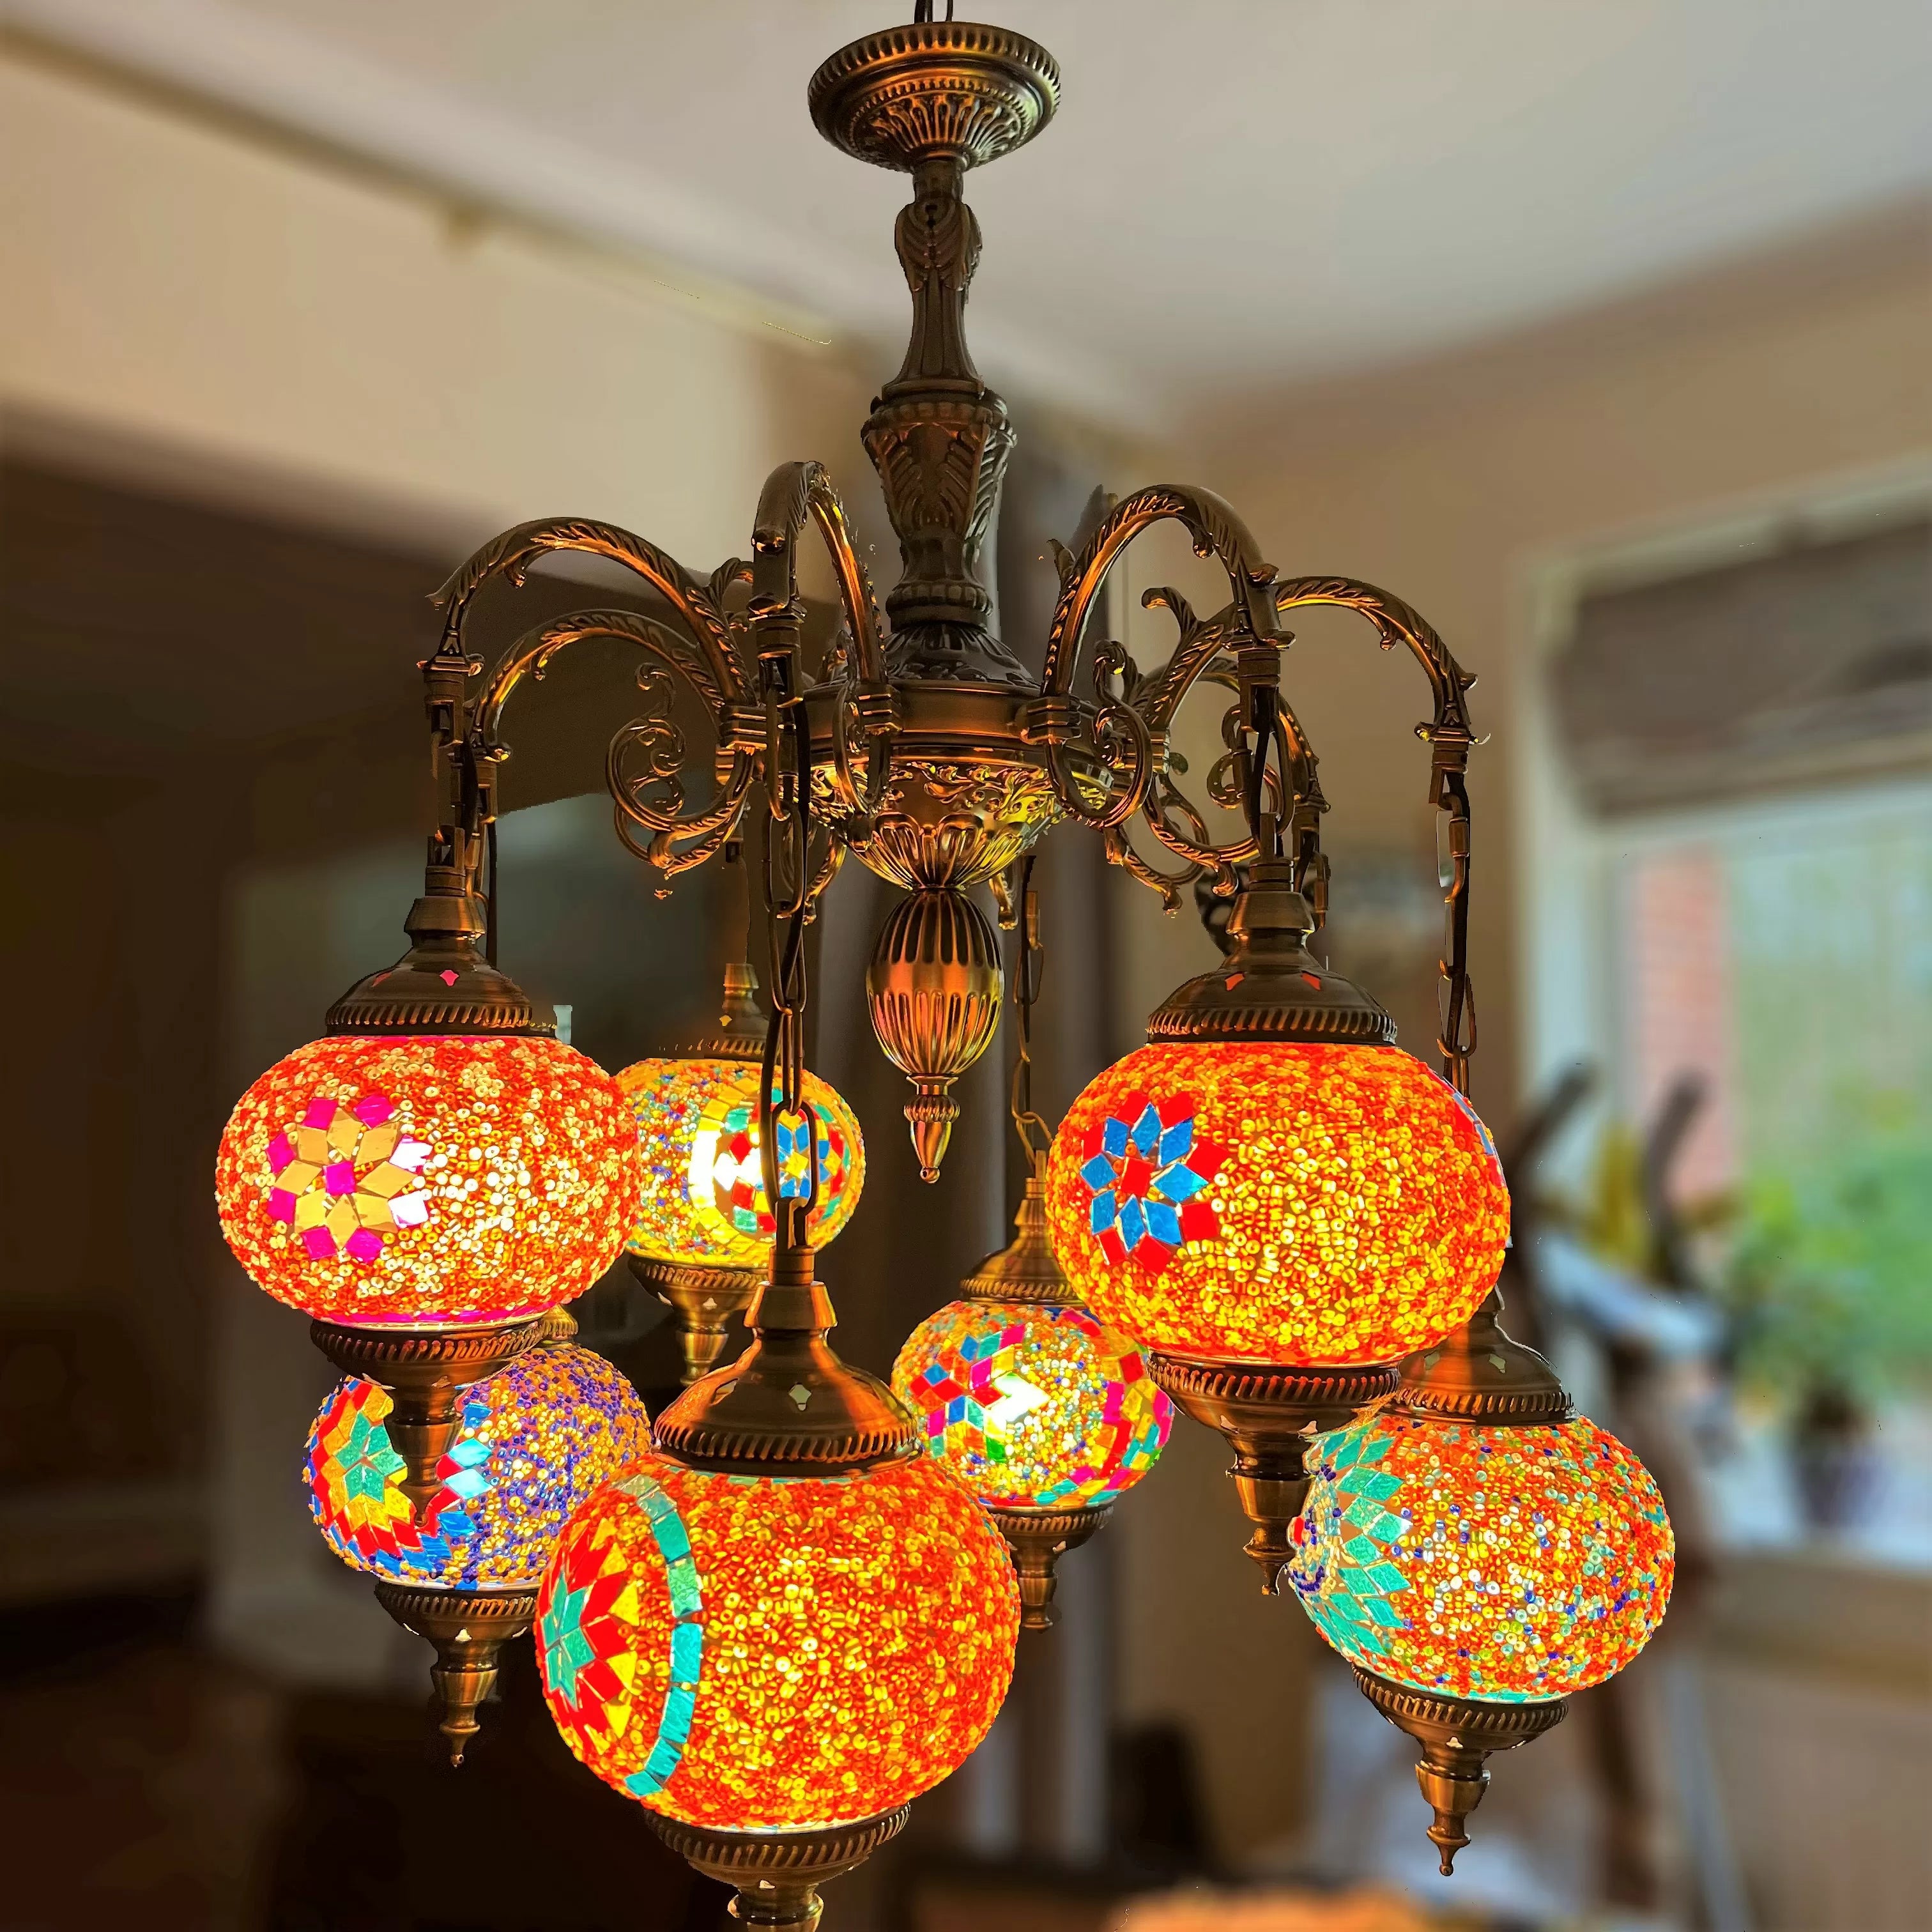 handmade-bohemian-style-ceiling-chandelier-nightingale-lamp-handcrafted-home-decor-multi-colour-beautiful-elegant-metal-glass